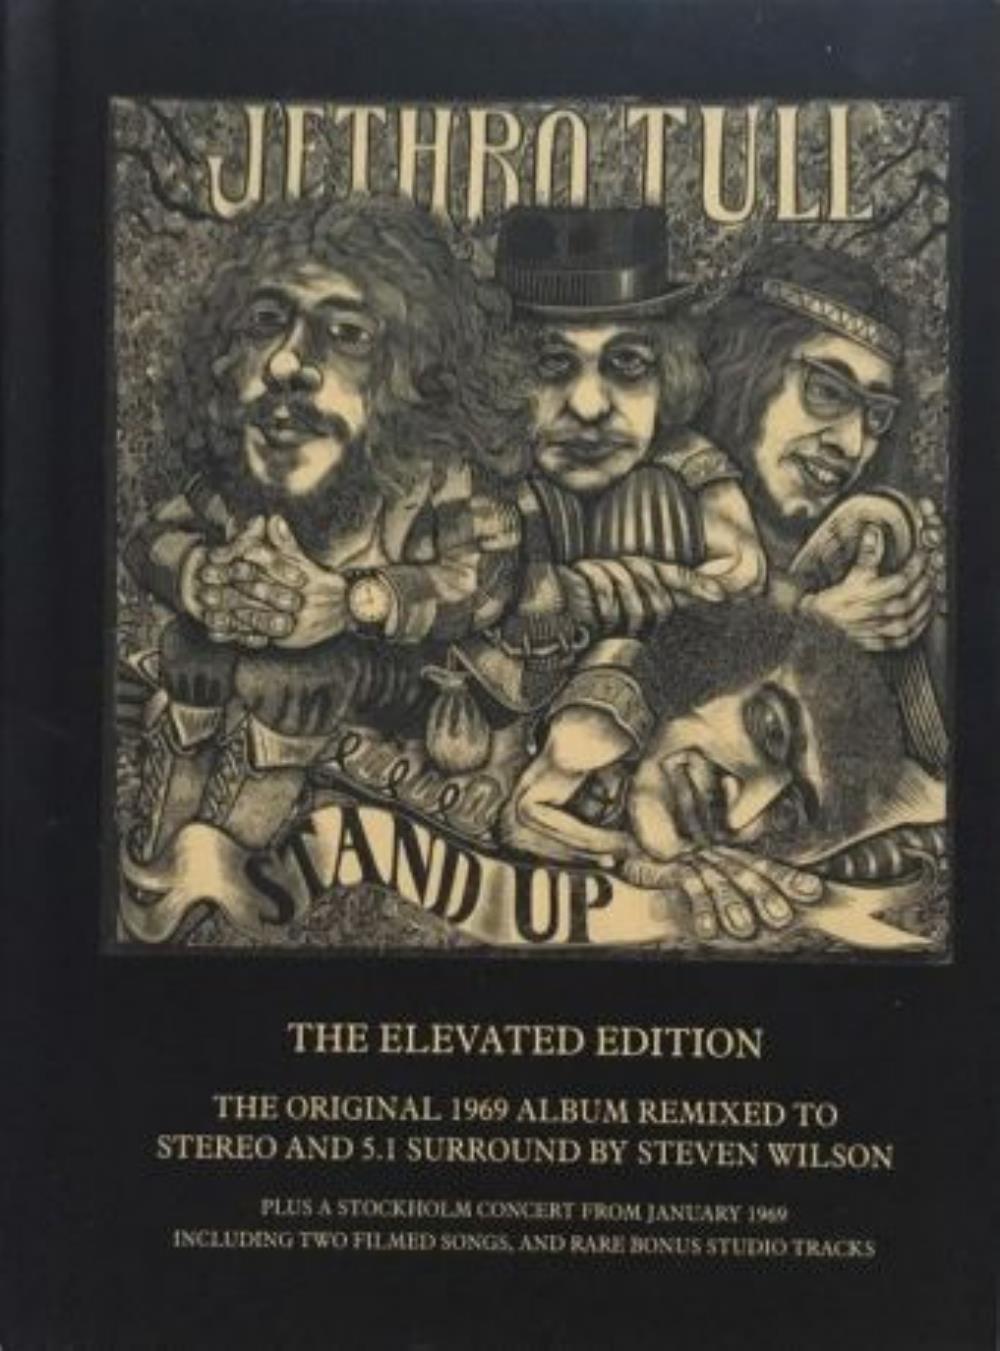 Jethro Tull Stand Up - The Elevated Edition album cover